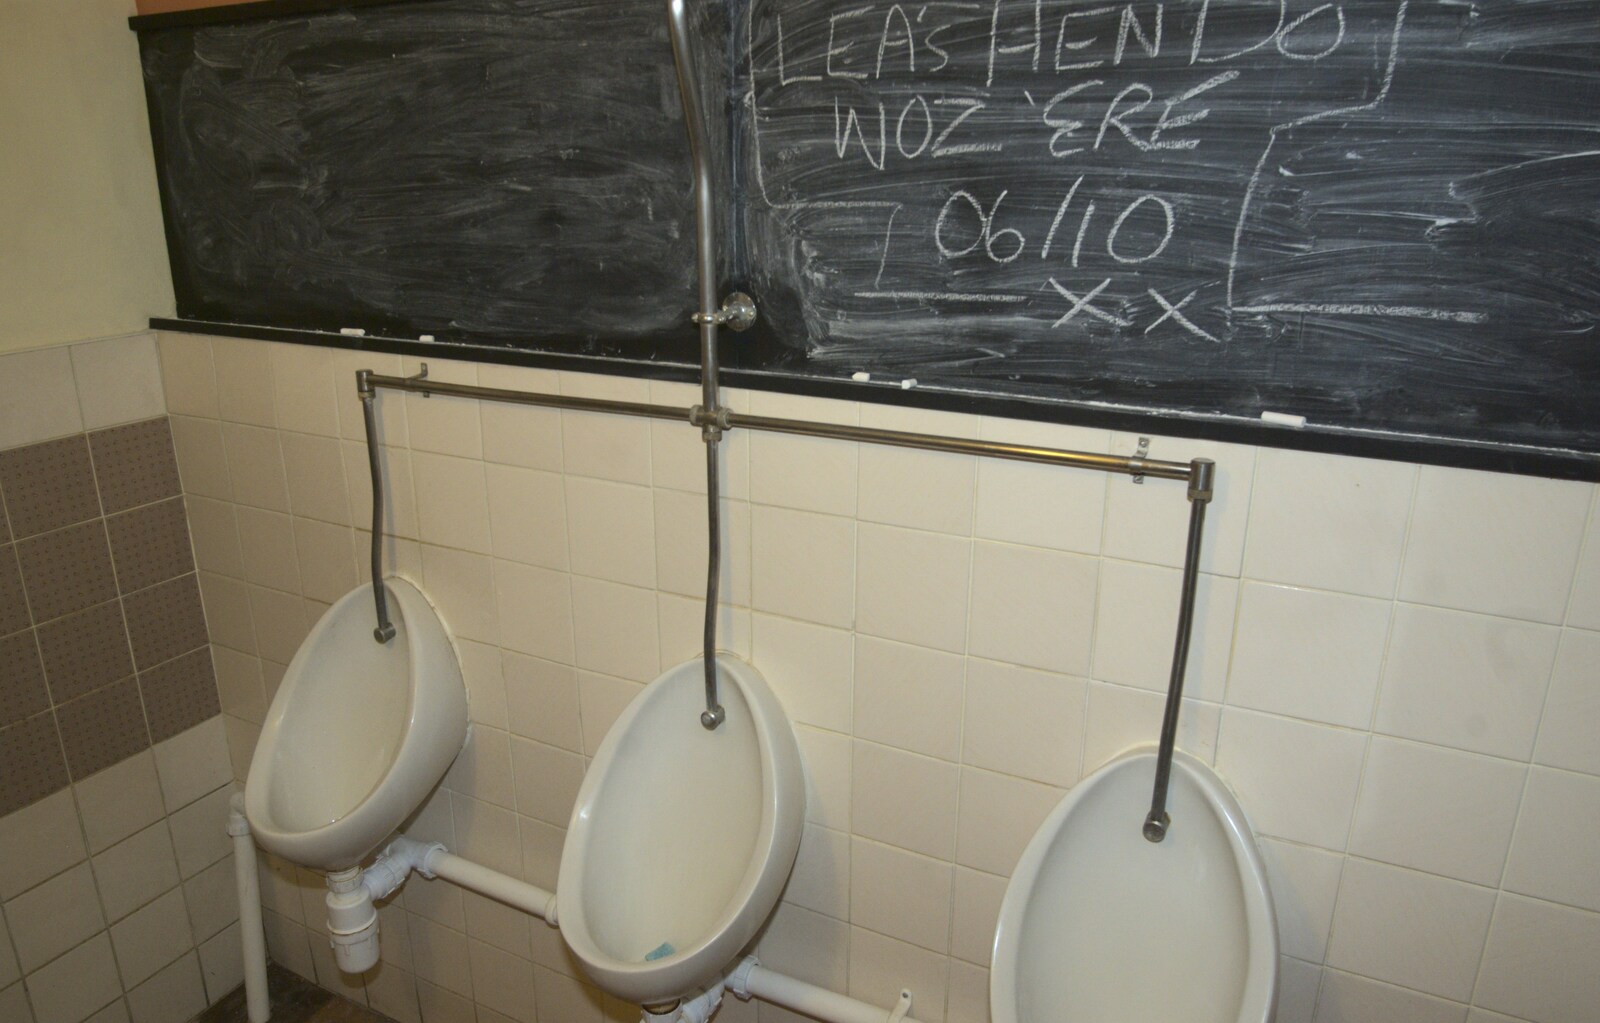 Pre-Wedding Beers at The Swan, Brome, Suffolk - 19th June 2010: Confusing graffiti in the boys' bogs